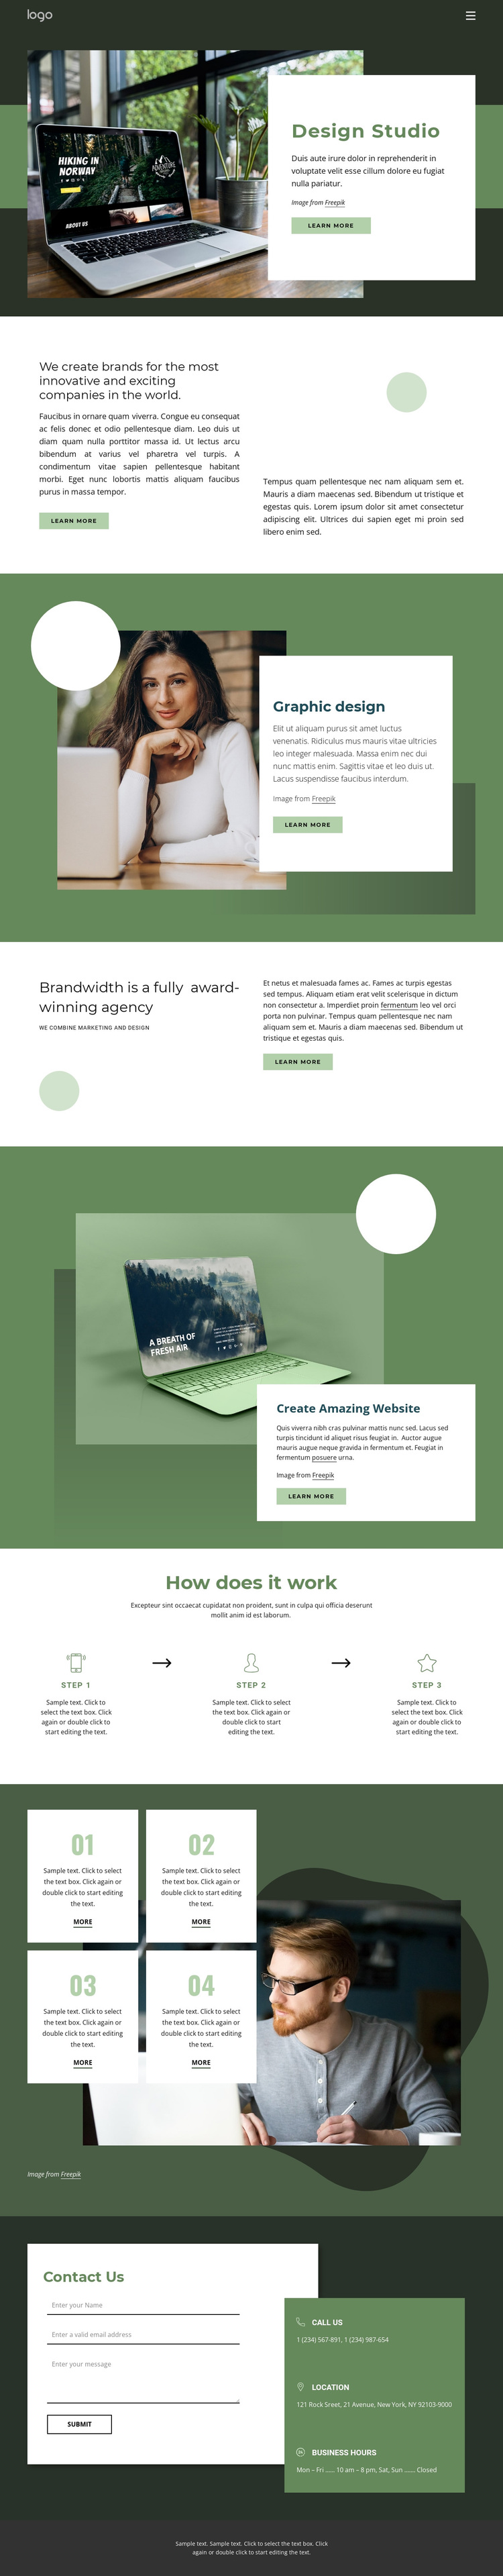 Design inspiration from nature Joomla Page Builder